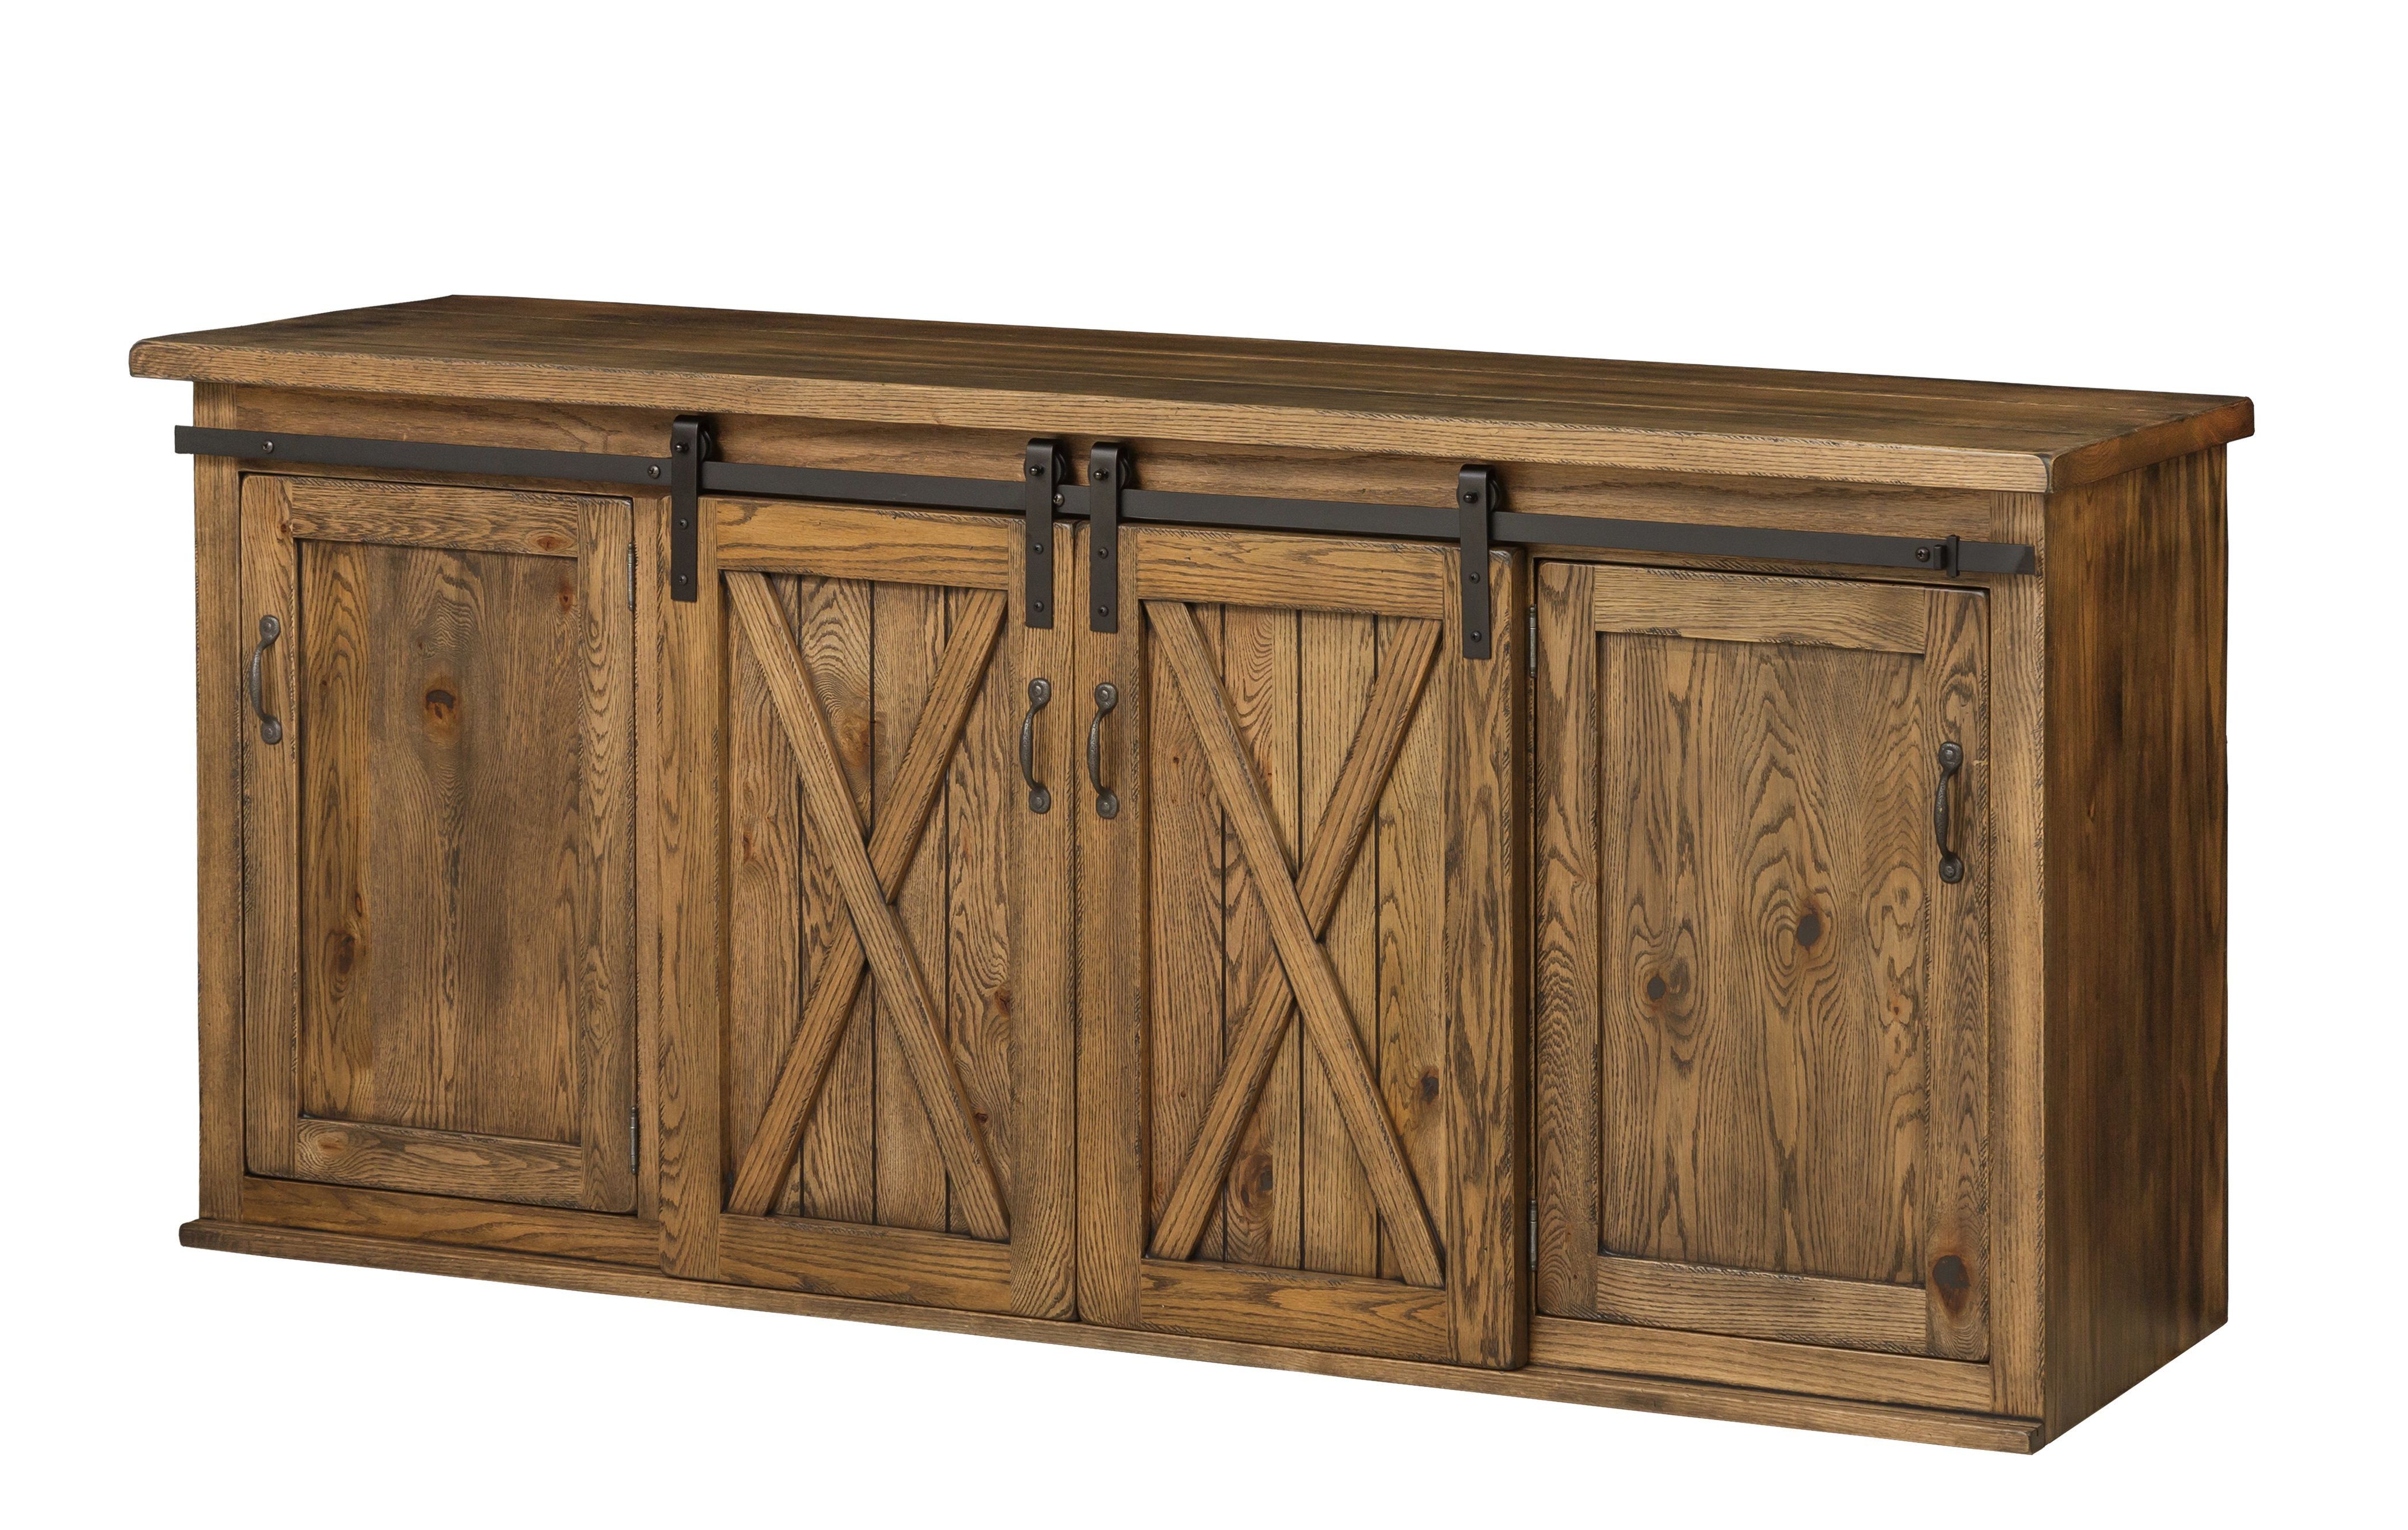 New England 74" Dining Buffet With Sliding Barn Doors From For Sideboards Double Barn Door Buffet (Gallery 3 of 20)